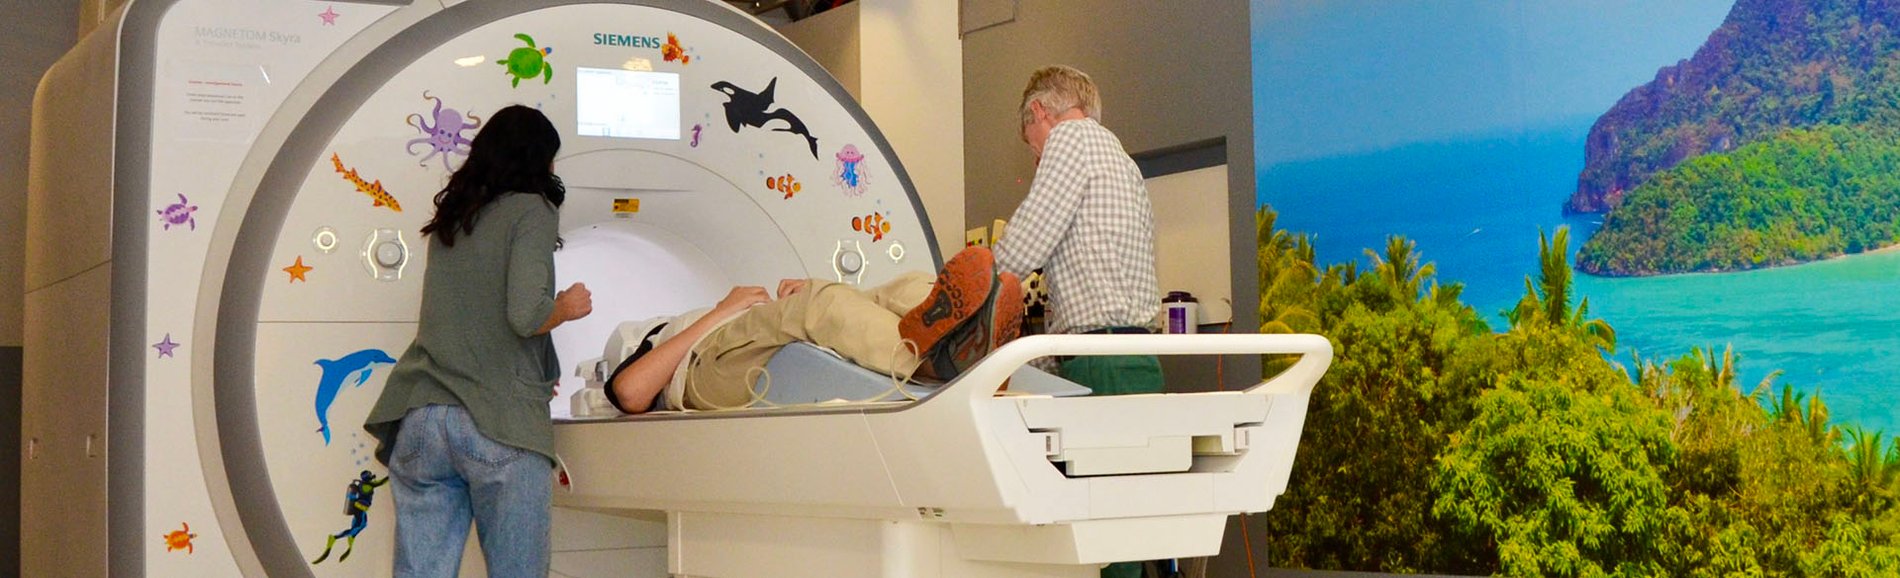 Researchers guiding patient into MRI scanner